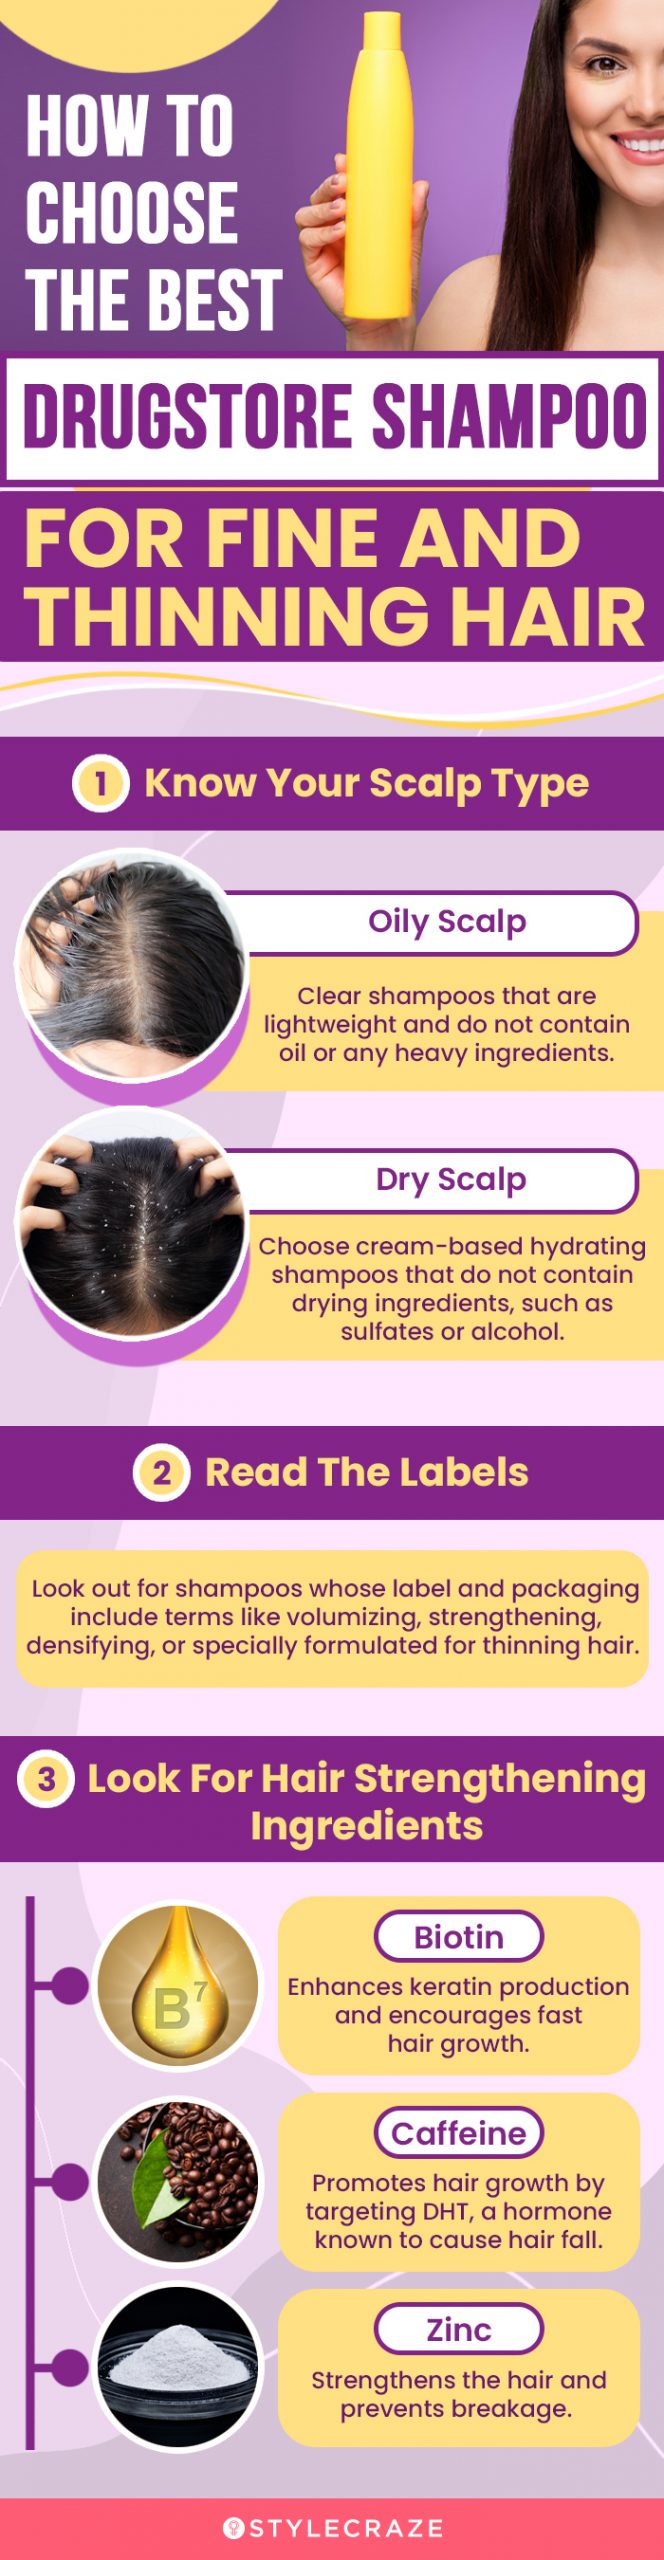 How To Choose The Best Drugstore Shampoo For Fine And Thinning Hair [infographic]